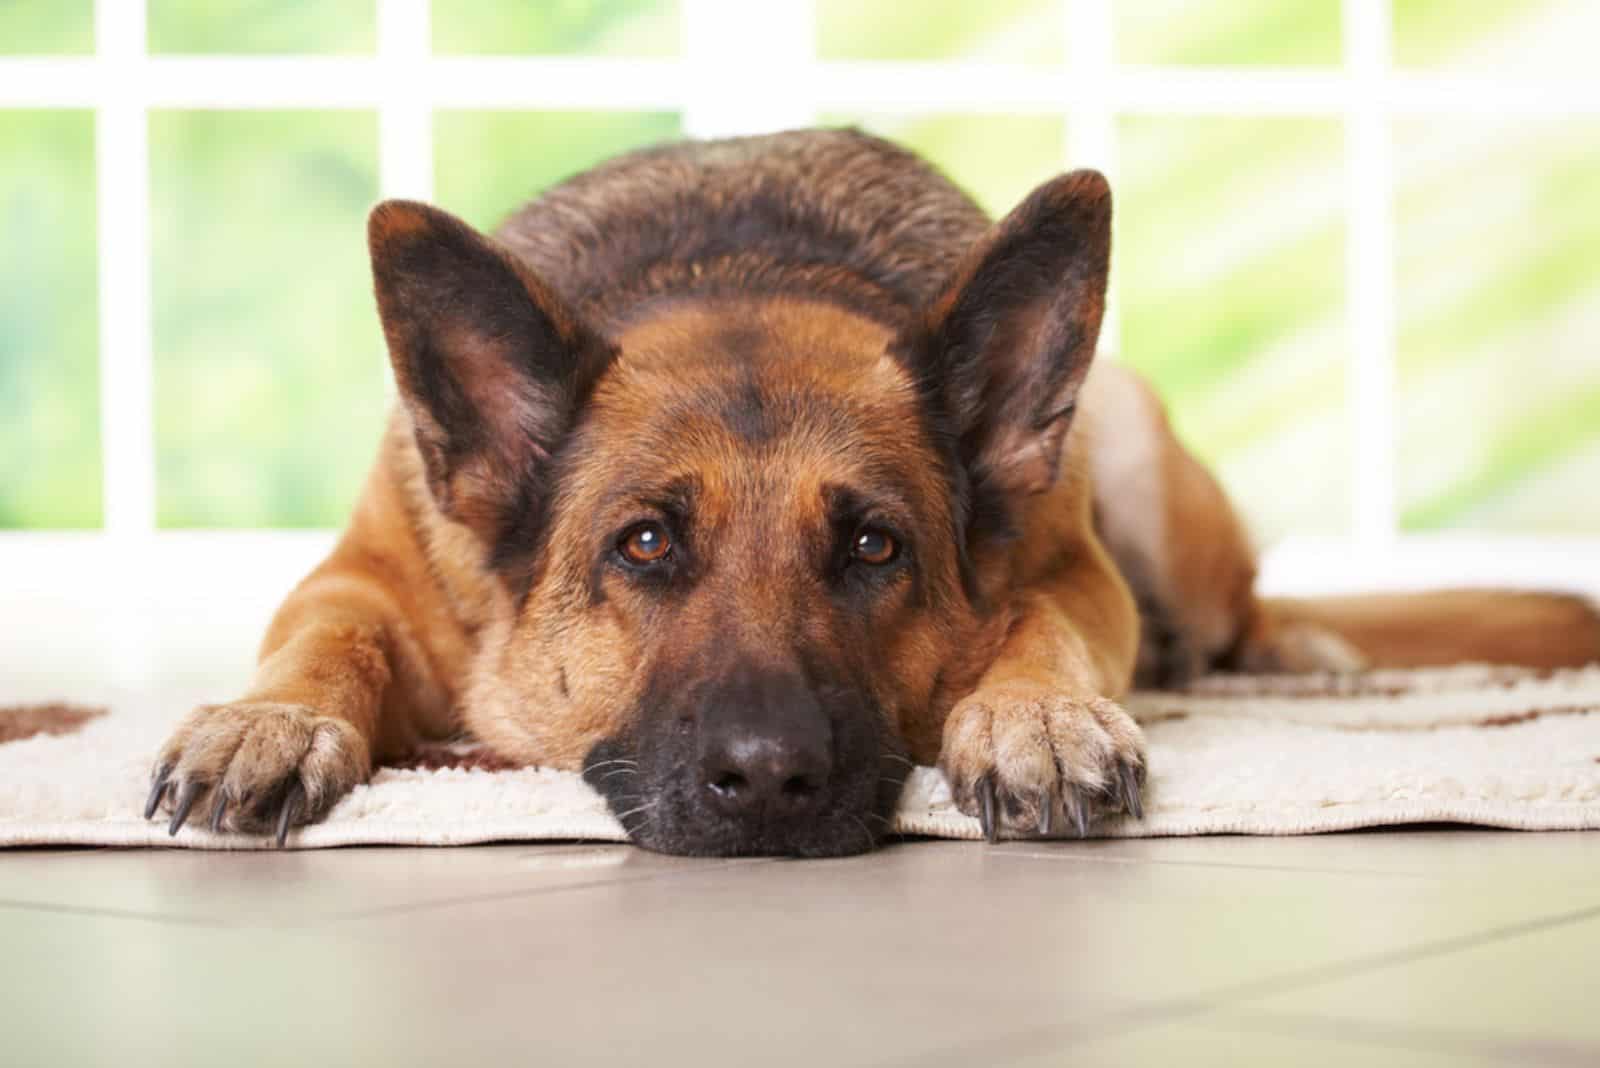 German shepherd dog laying on the carpet in home